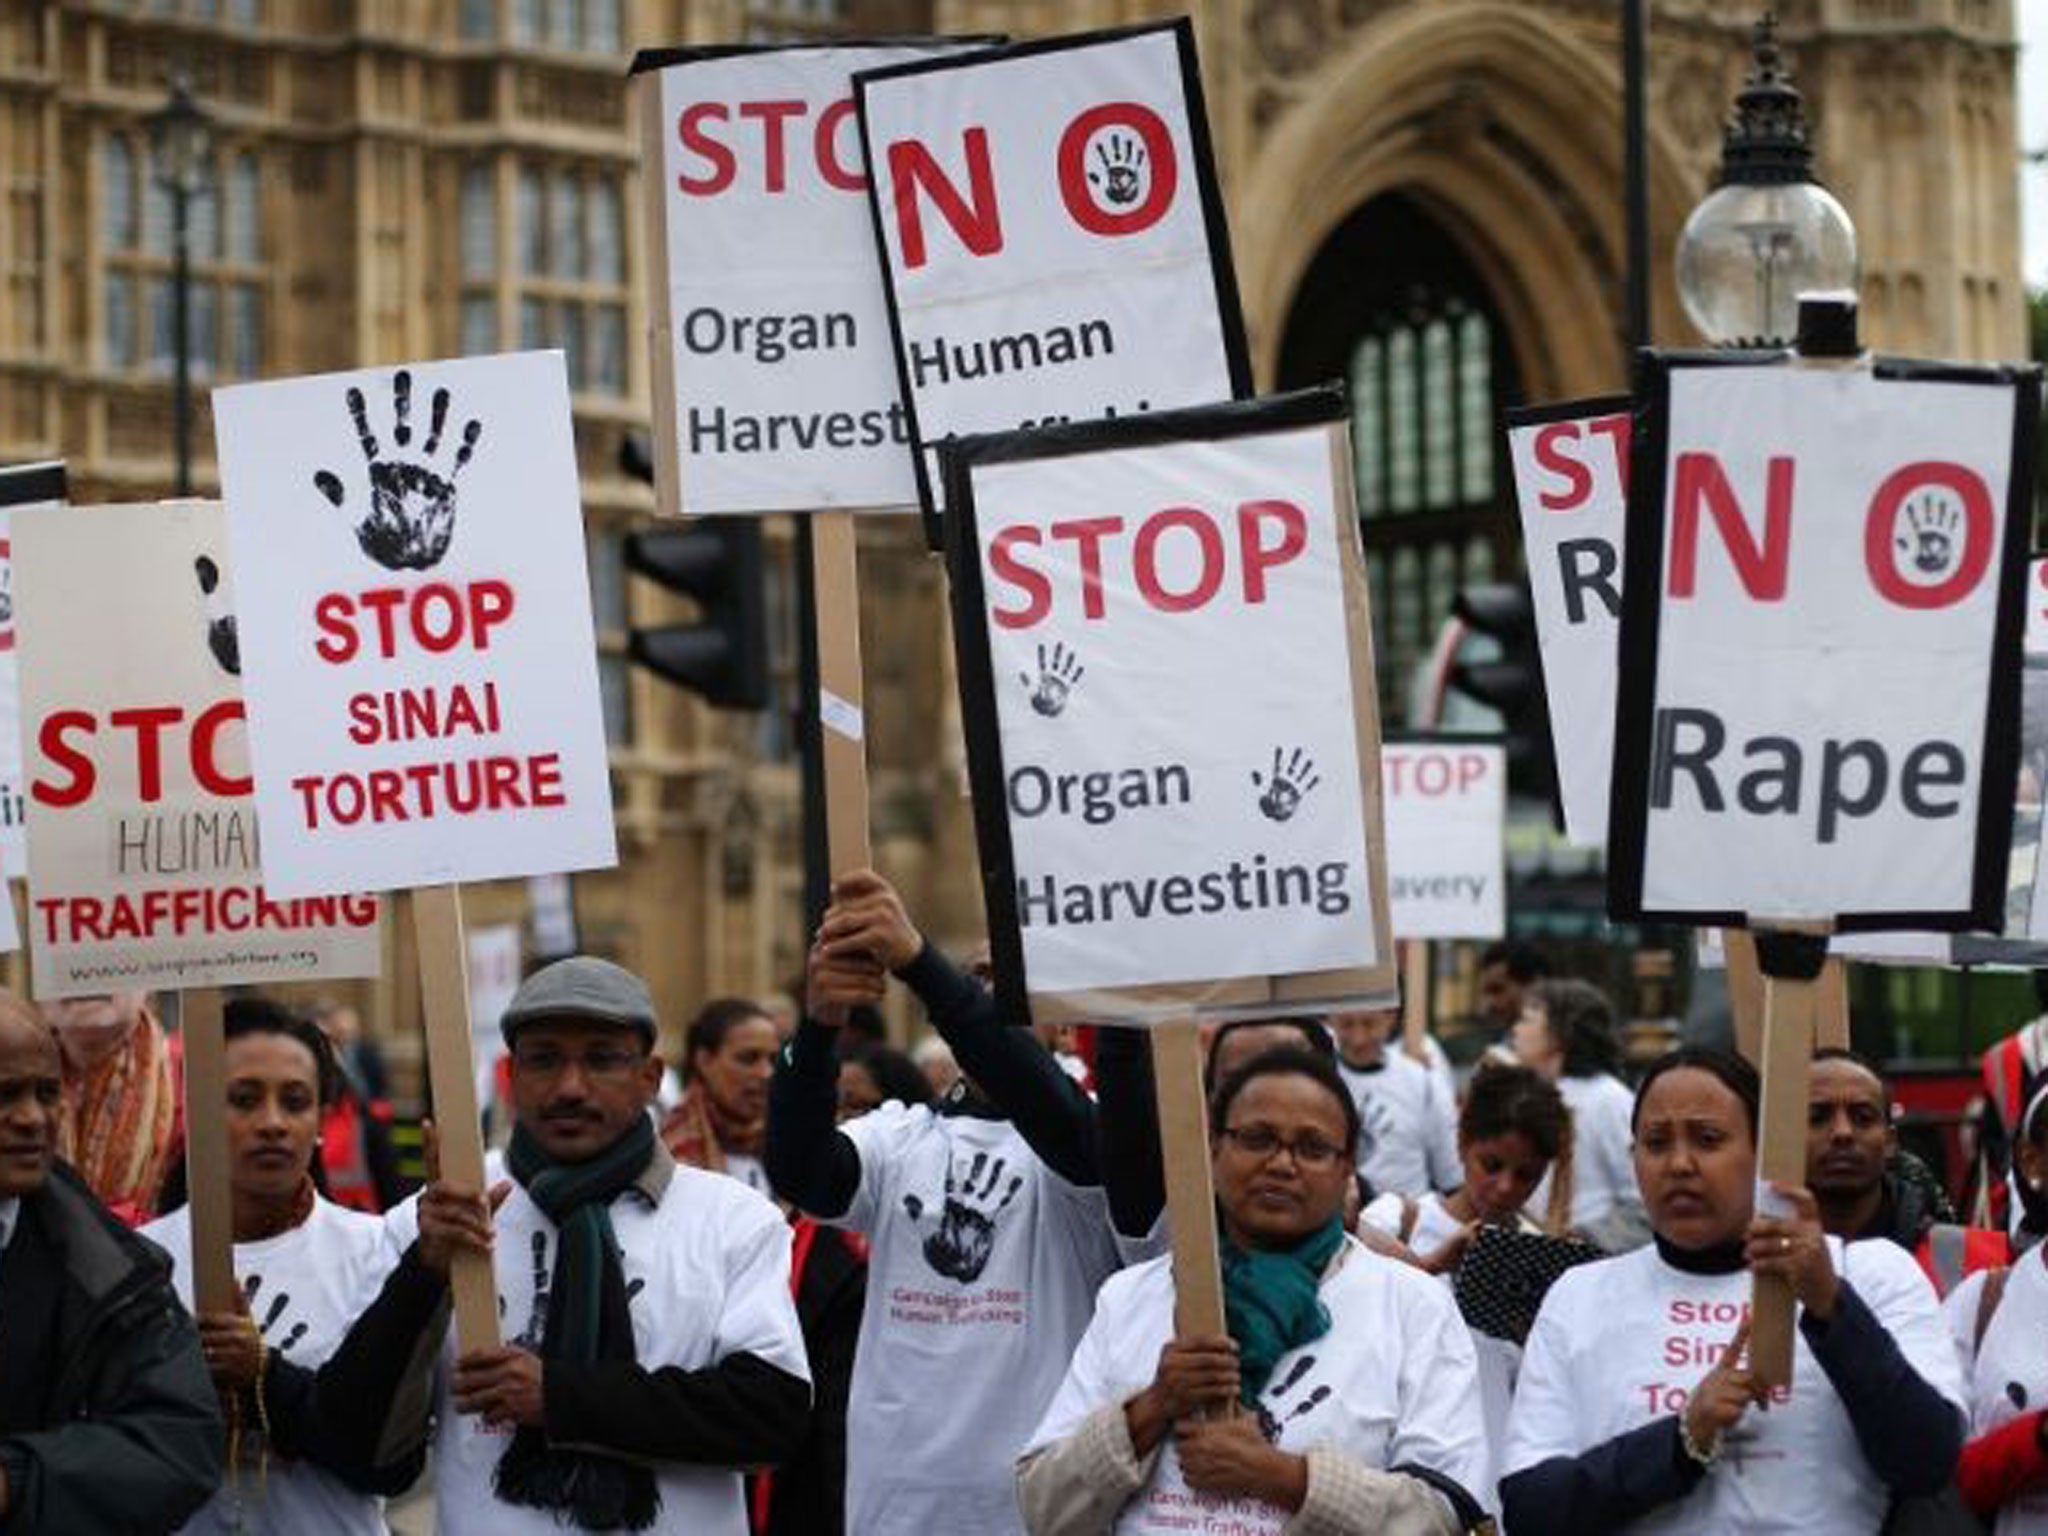 Party line: Anti-slavery activists get their point across during a rally outside Parliament earlier this year